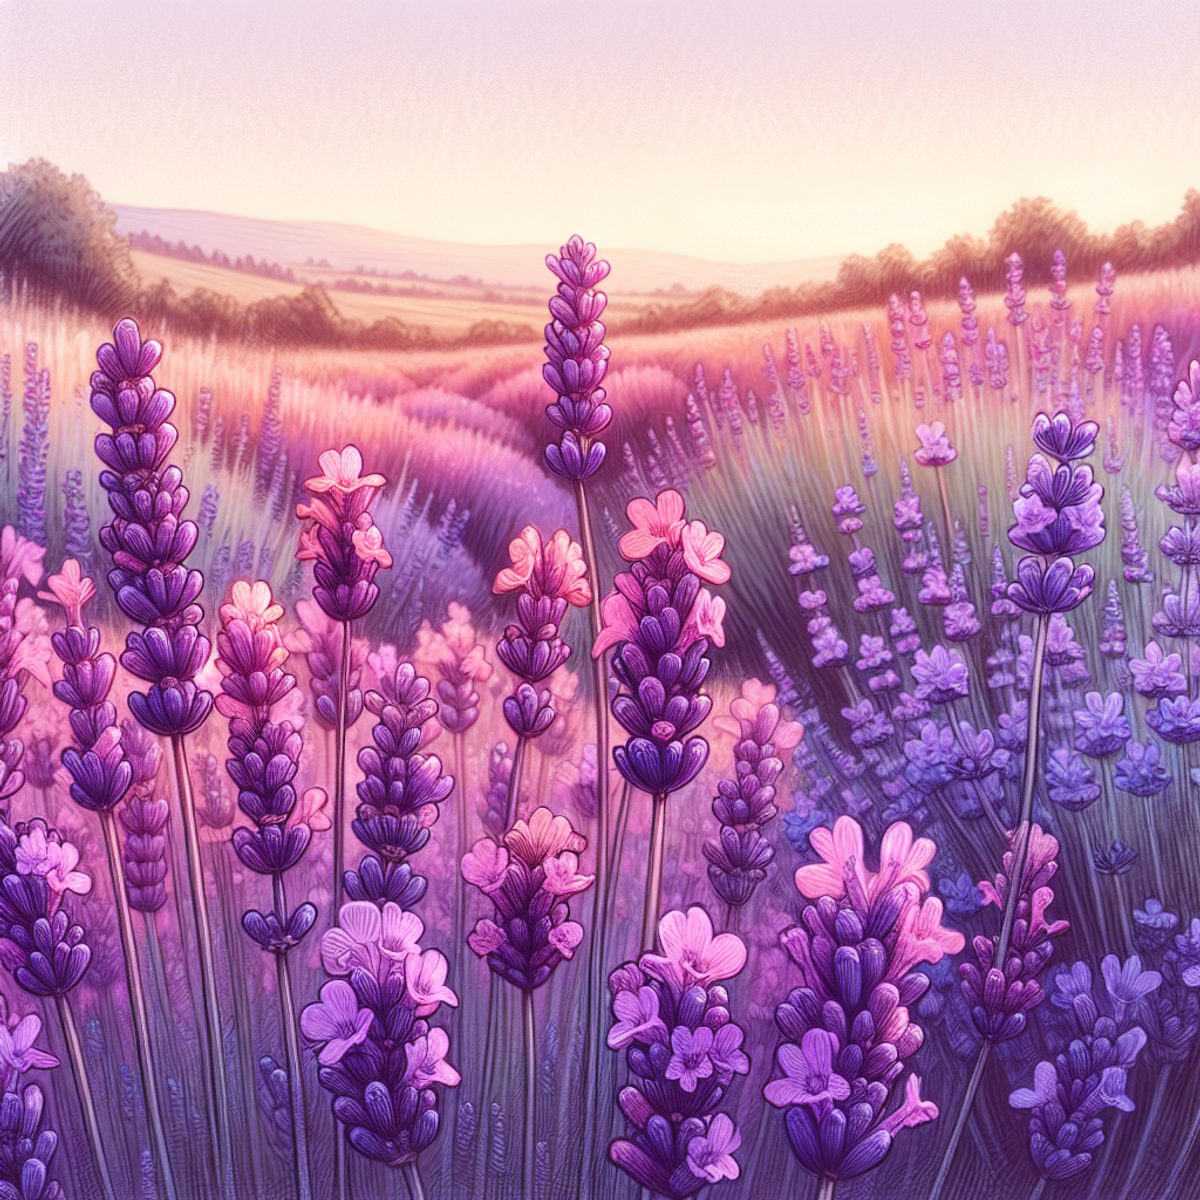 A close-up image of vibrant purple lavender flowers in full bloom, creating a serene and relaxing natural setting.